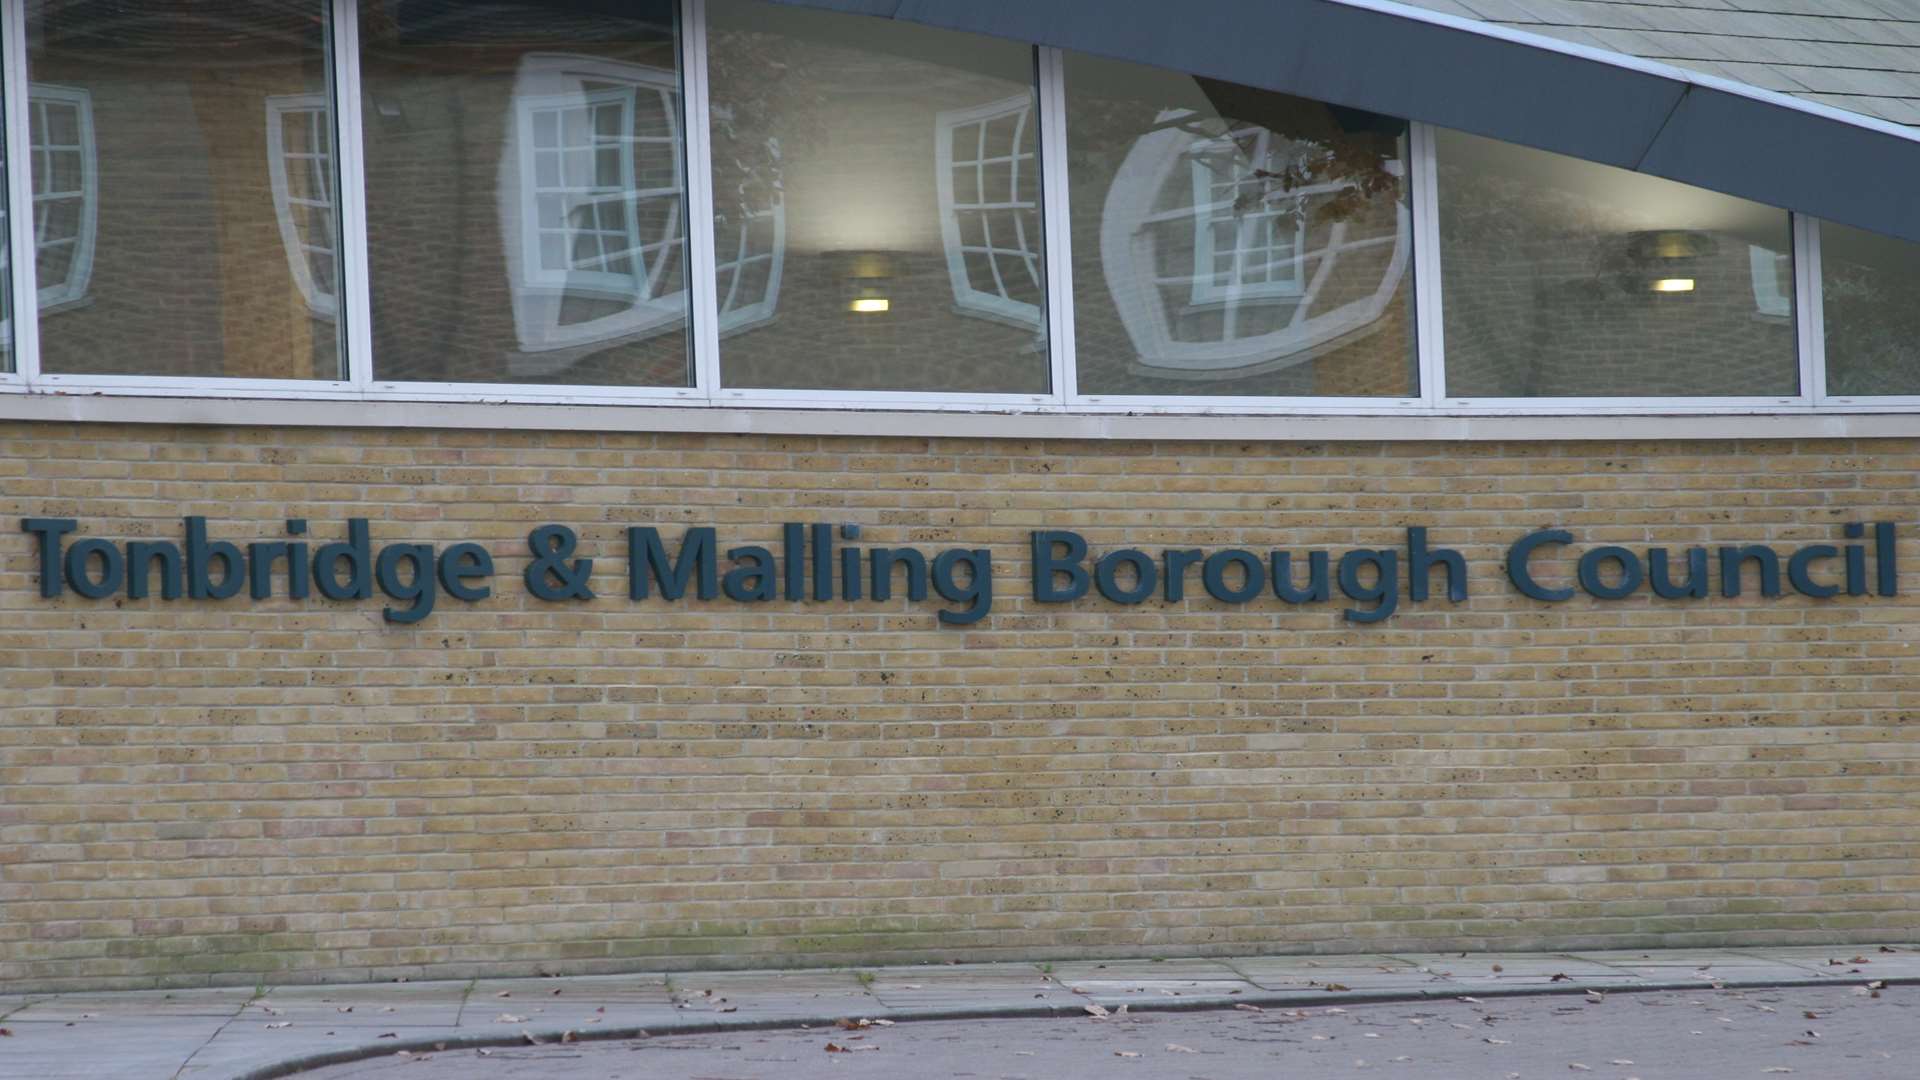 Tonbridge and Malling Council Offices at King's Hill